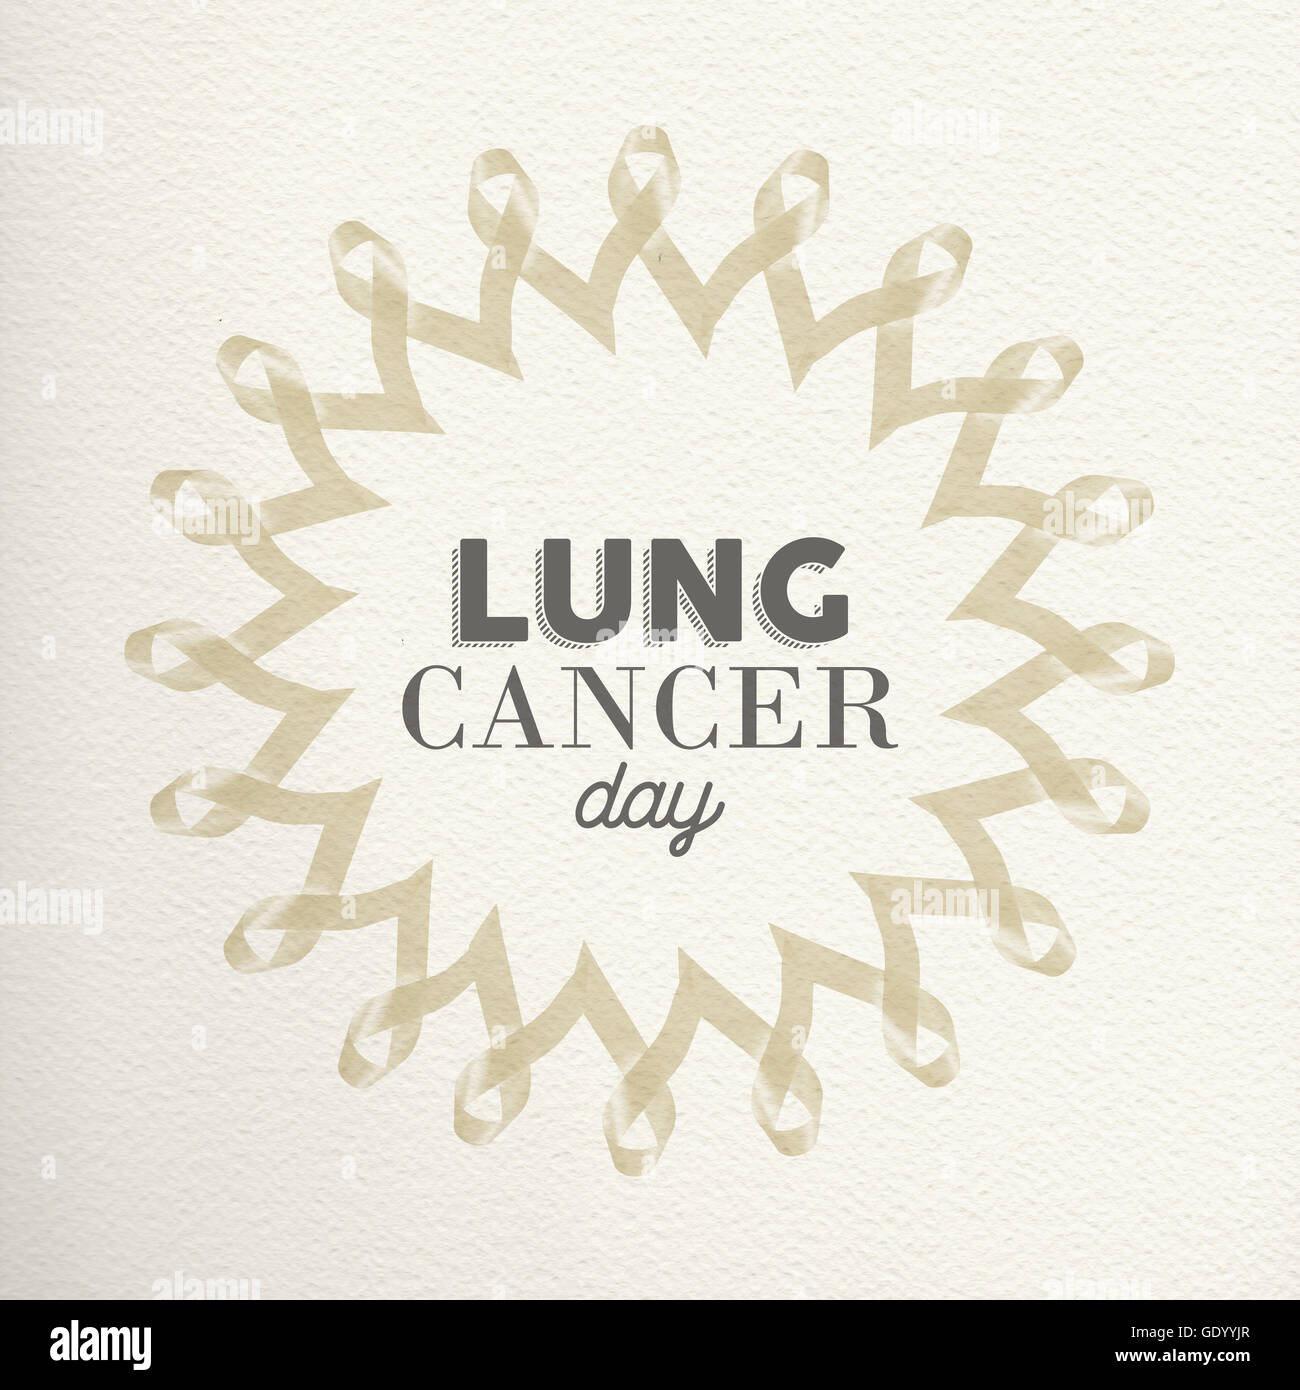 Lung cancer day mandala design made of white ribbons with typography for awareness support. Stock Photo